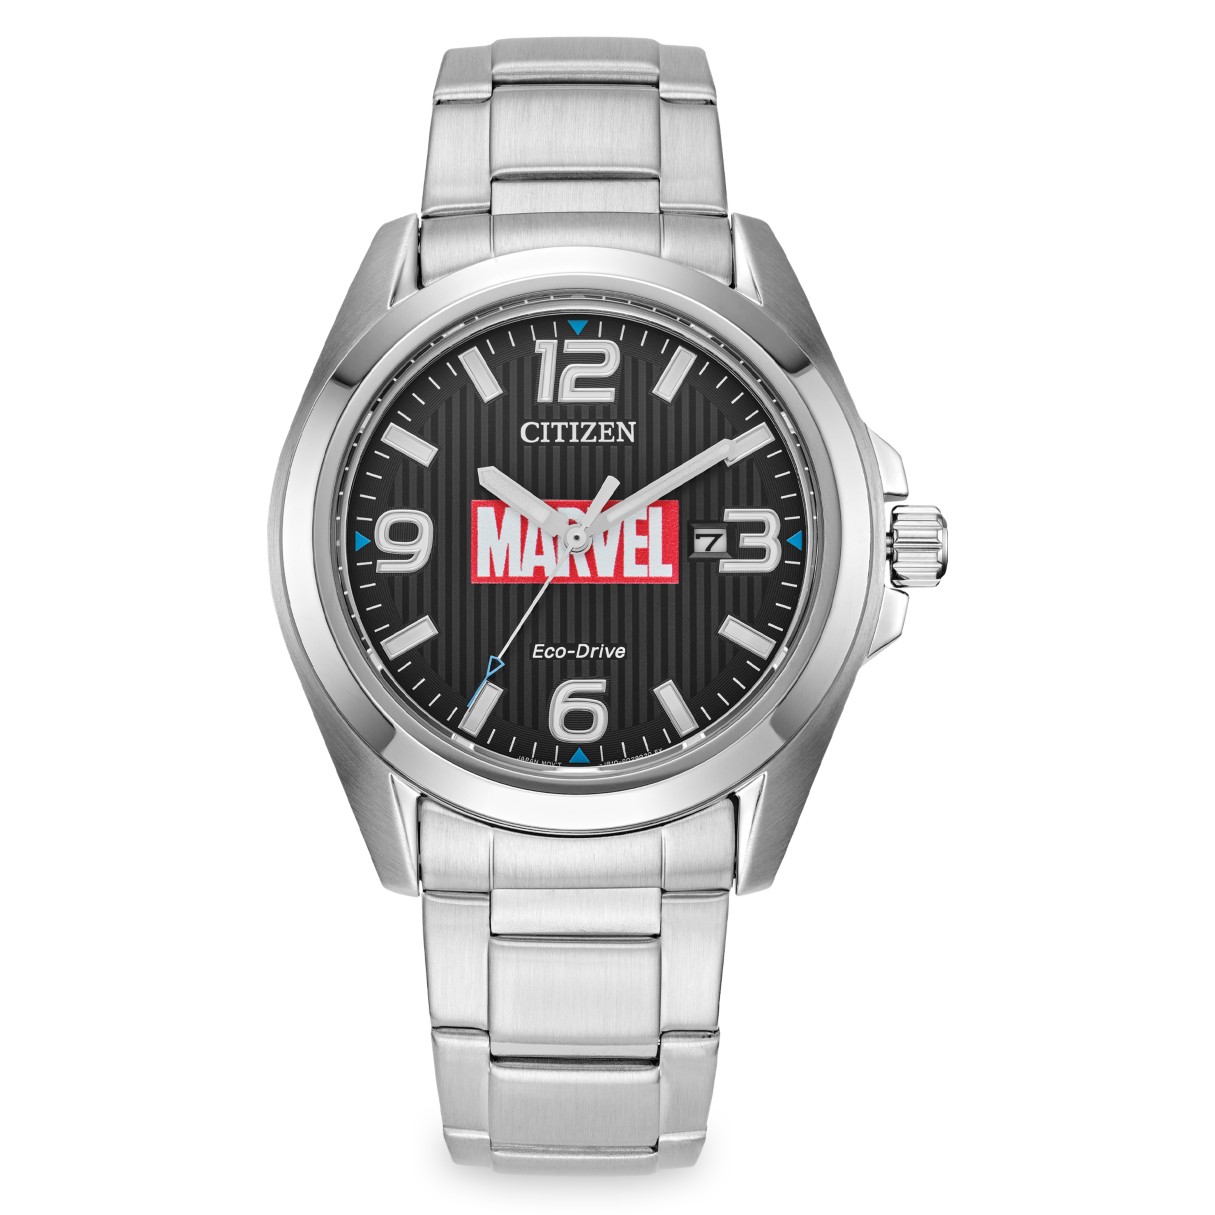 Marvel Eco-Drive Watch for Adults by Citizen